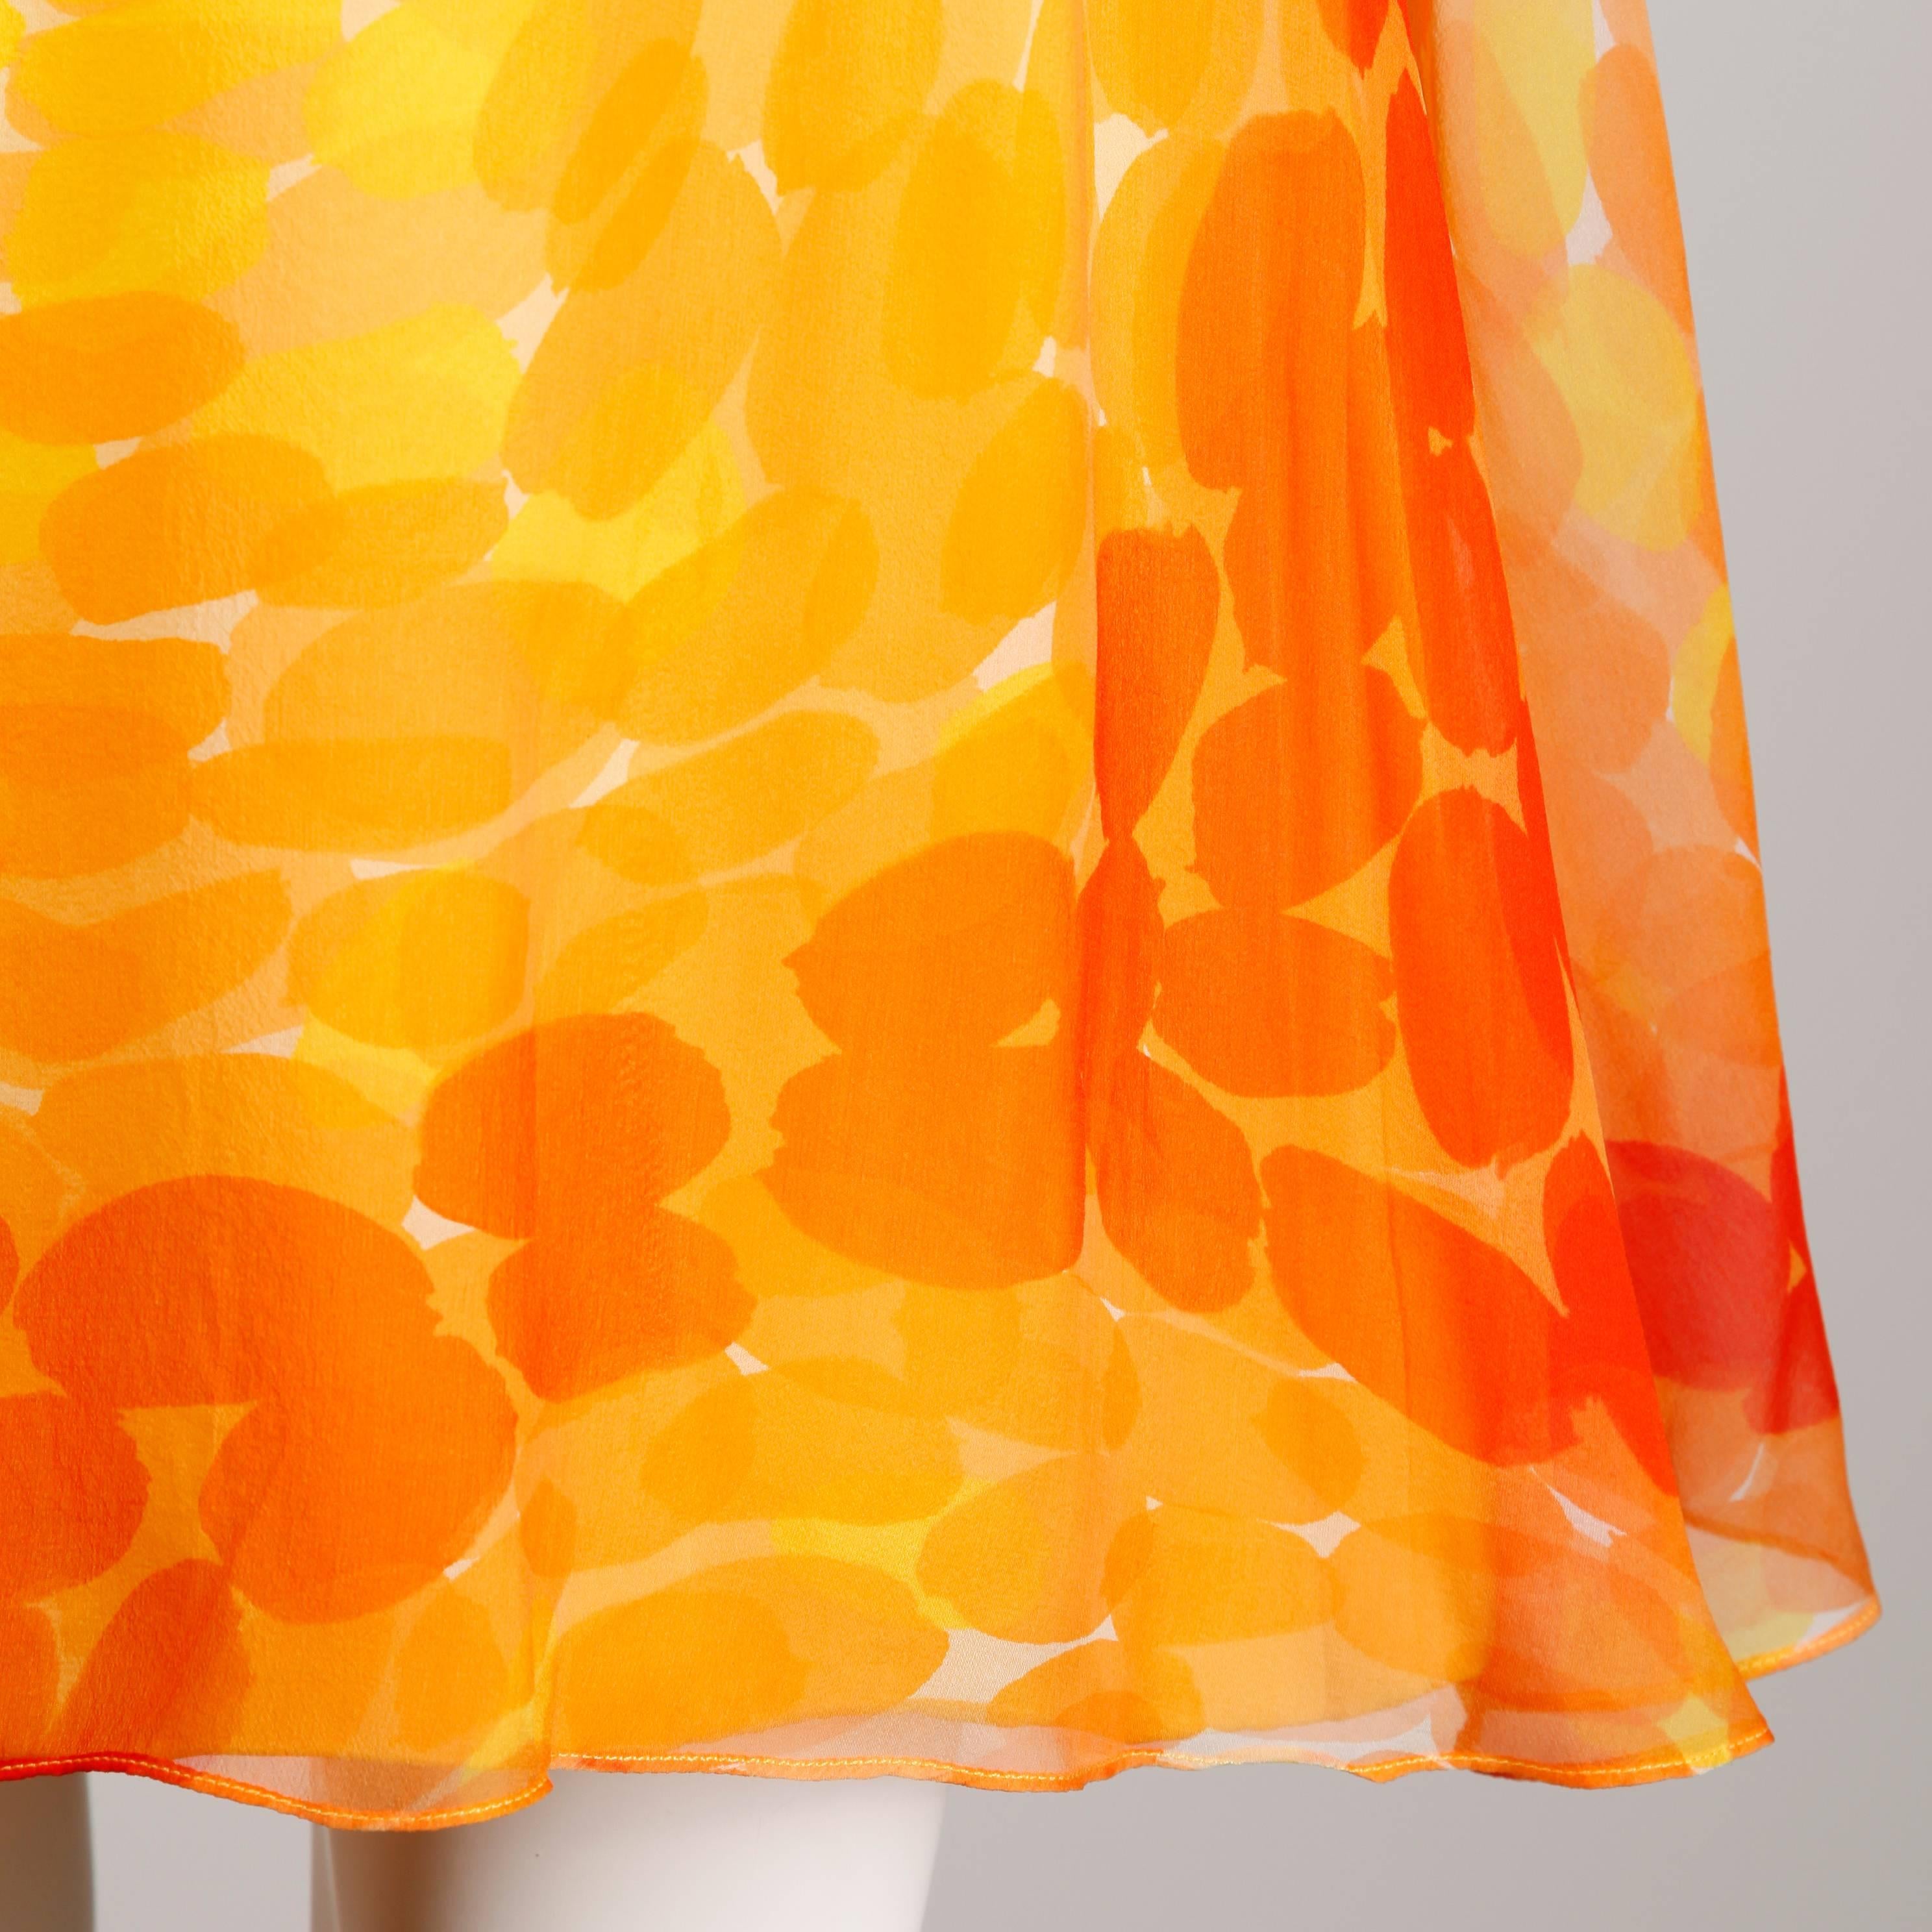 Pab 1960s Vintage Screen Print Silk Chiffon Mod Dress in Yellow and Orange In Excellent Condition For Sale In Sparks, NV